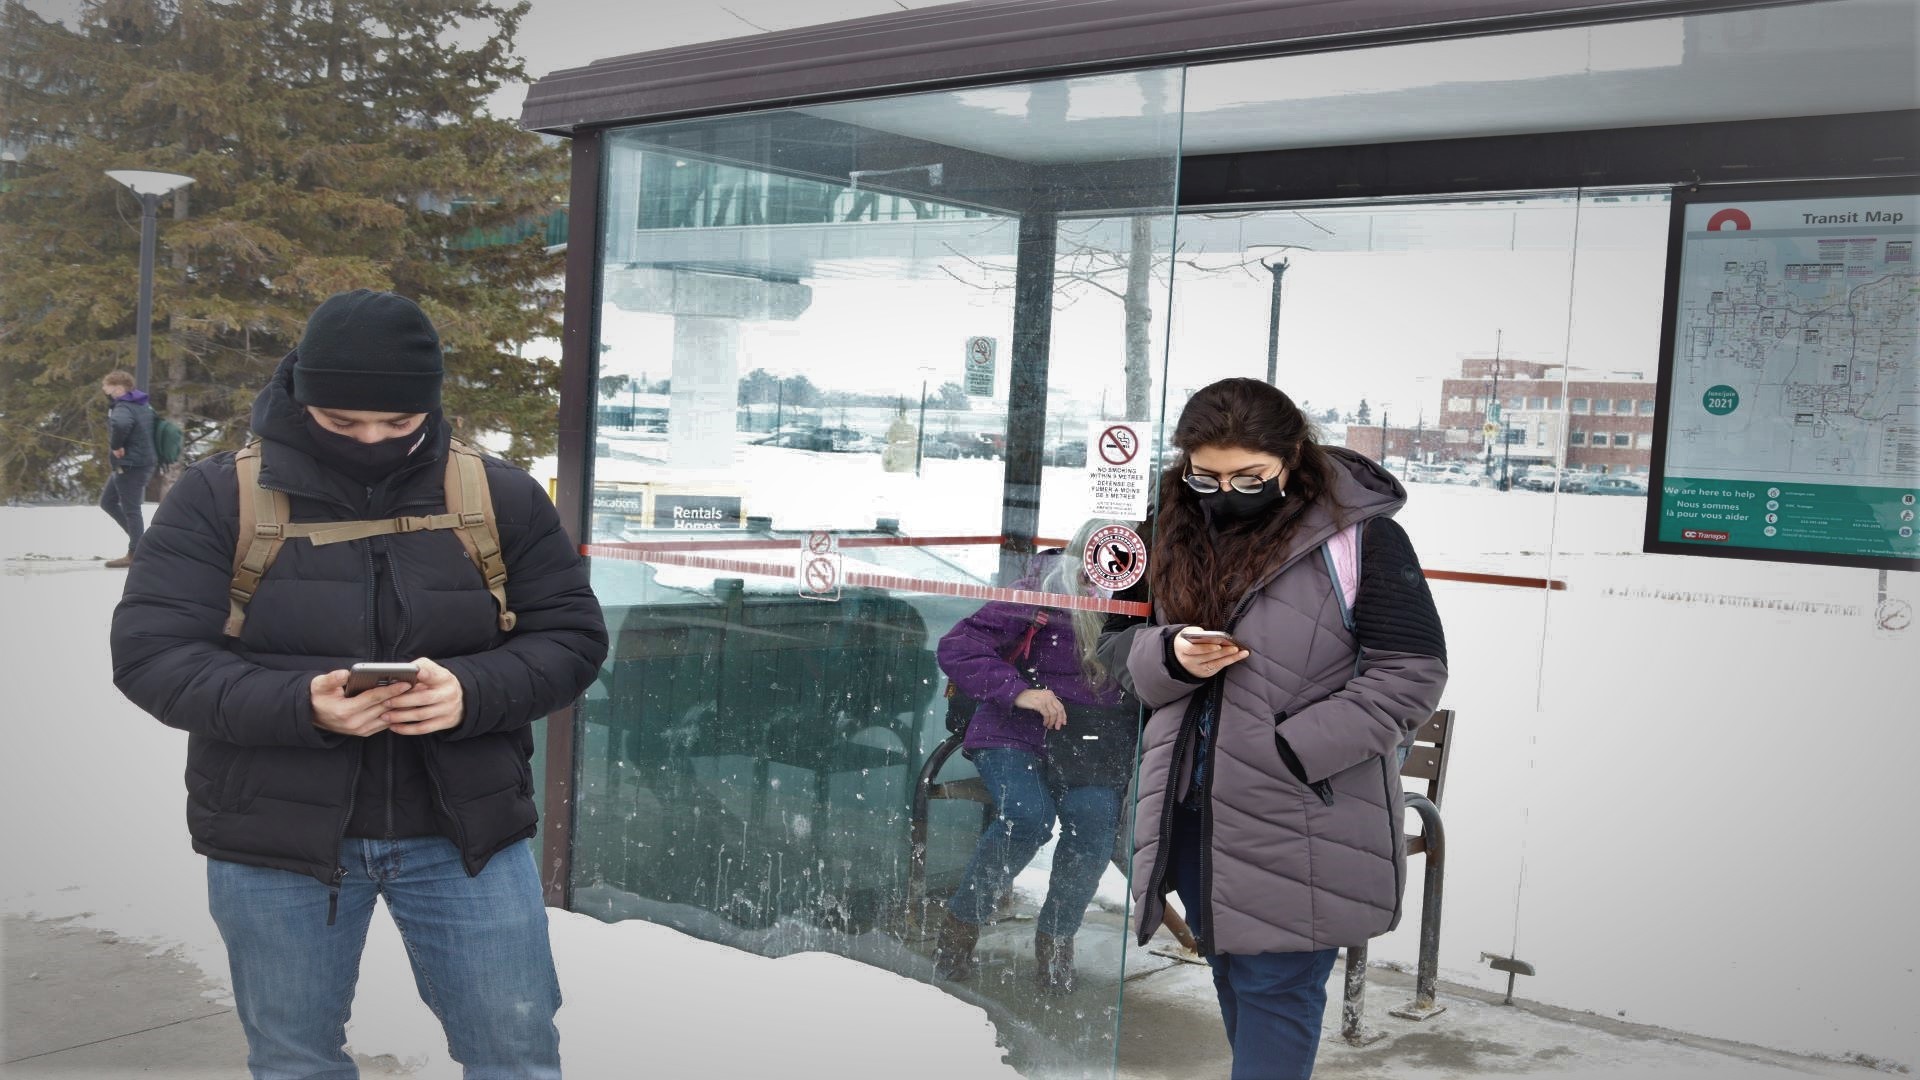 Nicolas Touma, a first-year engineering technician student at Algonquin College waiting for his bus to go home alongside Aashima Gulati, a University of Ottawa student